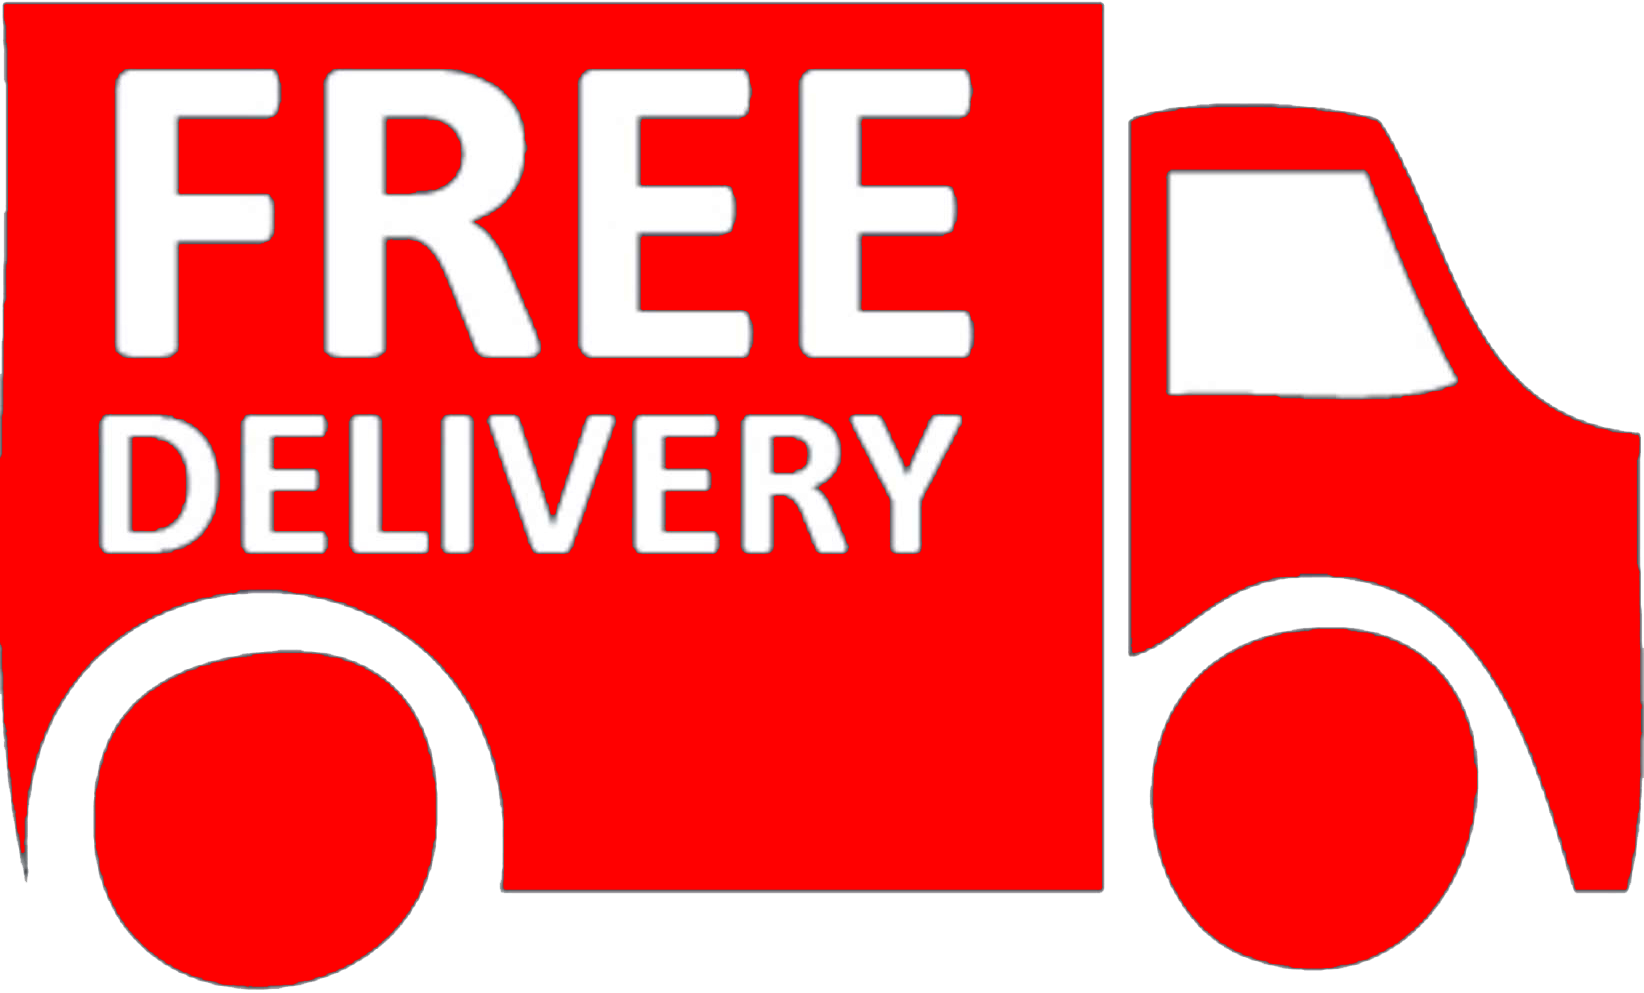 Free Shipping Truck Transparent Image